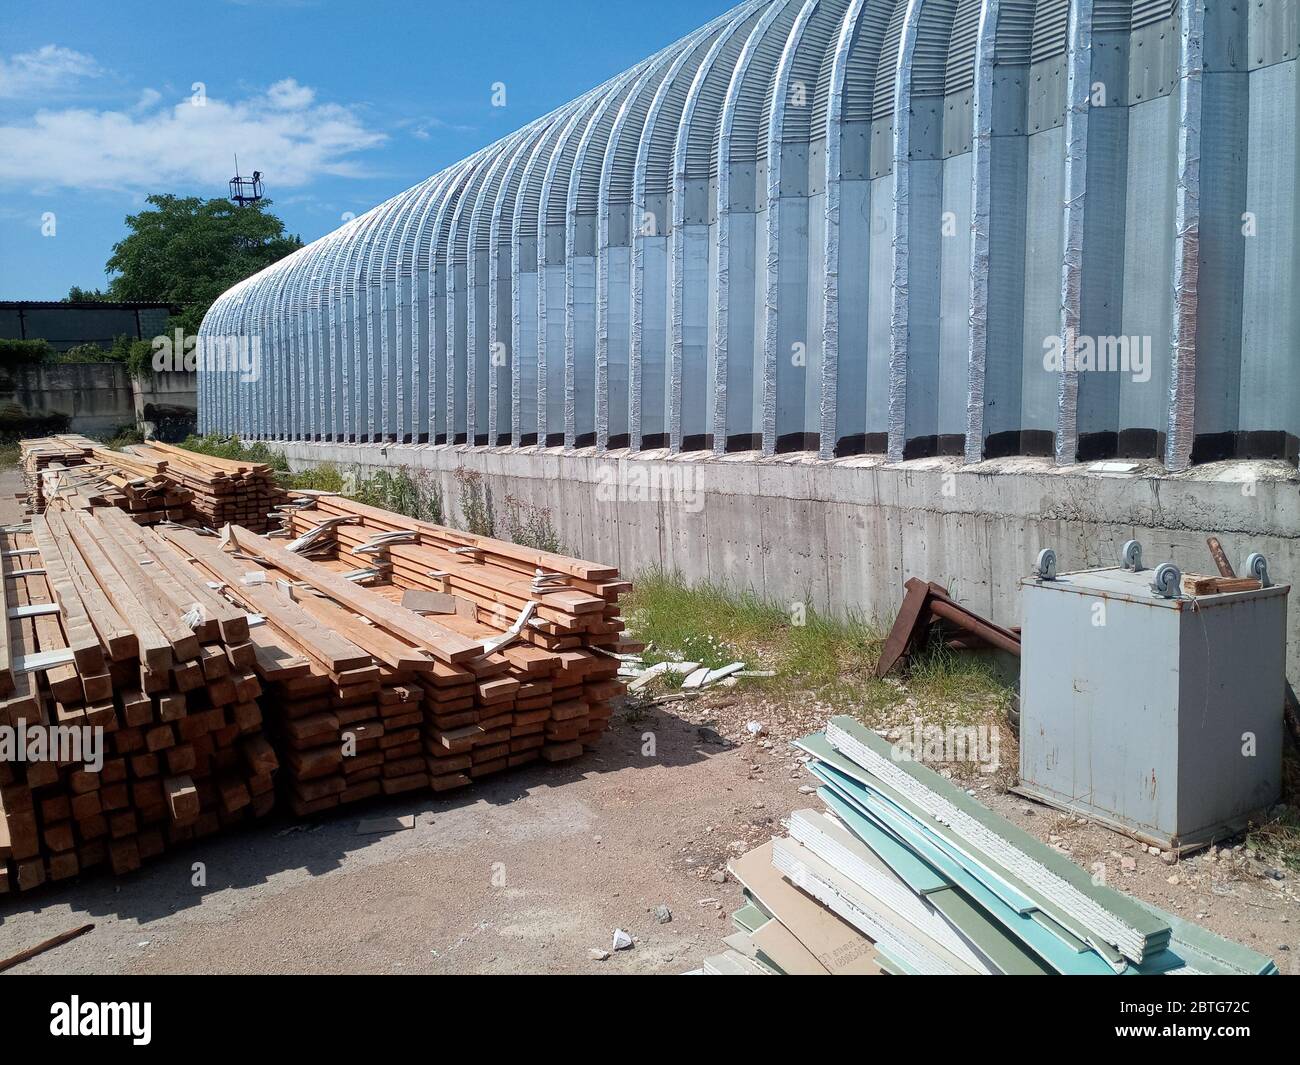 Warehouse of building materials. a Building base, metal, wood and blocks with bricks. Stock Photo